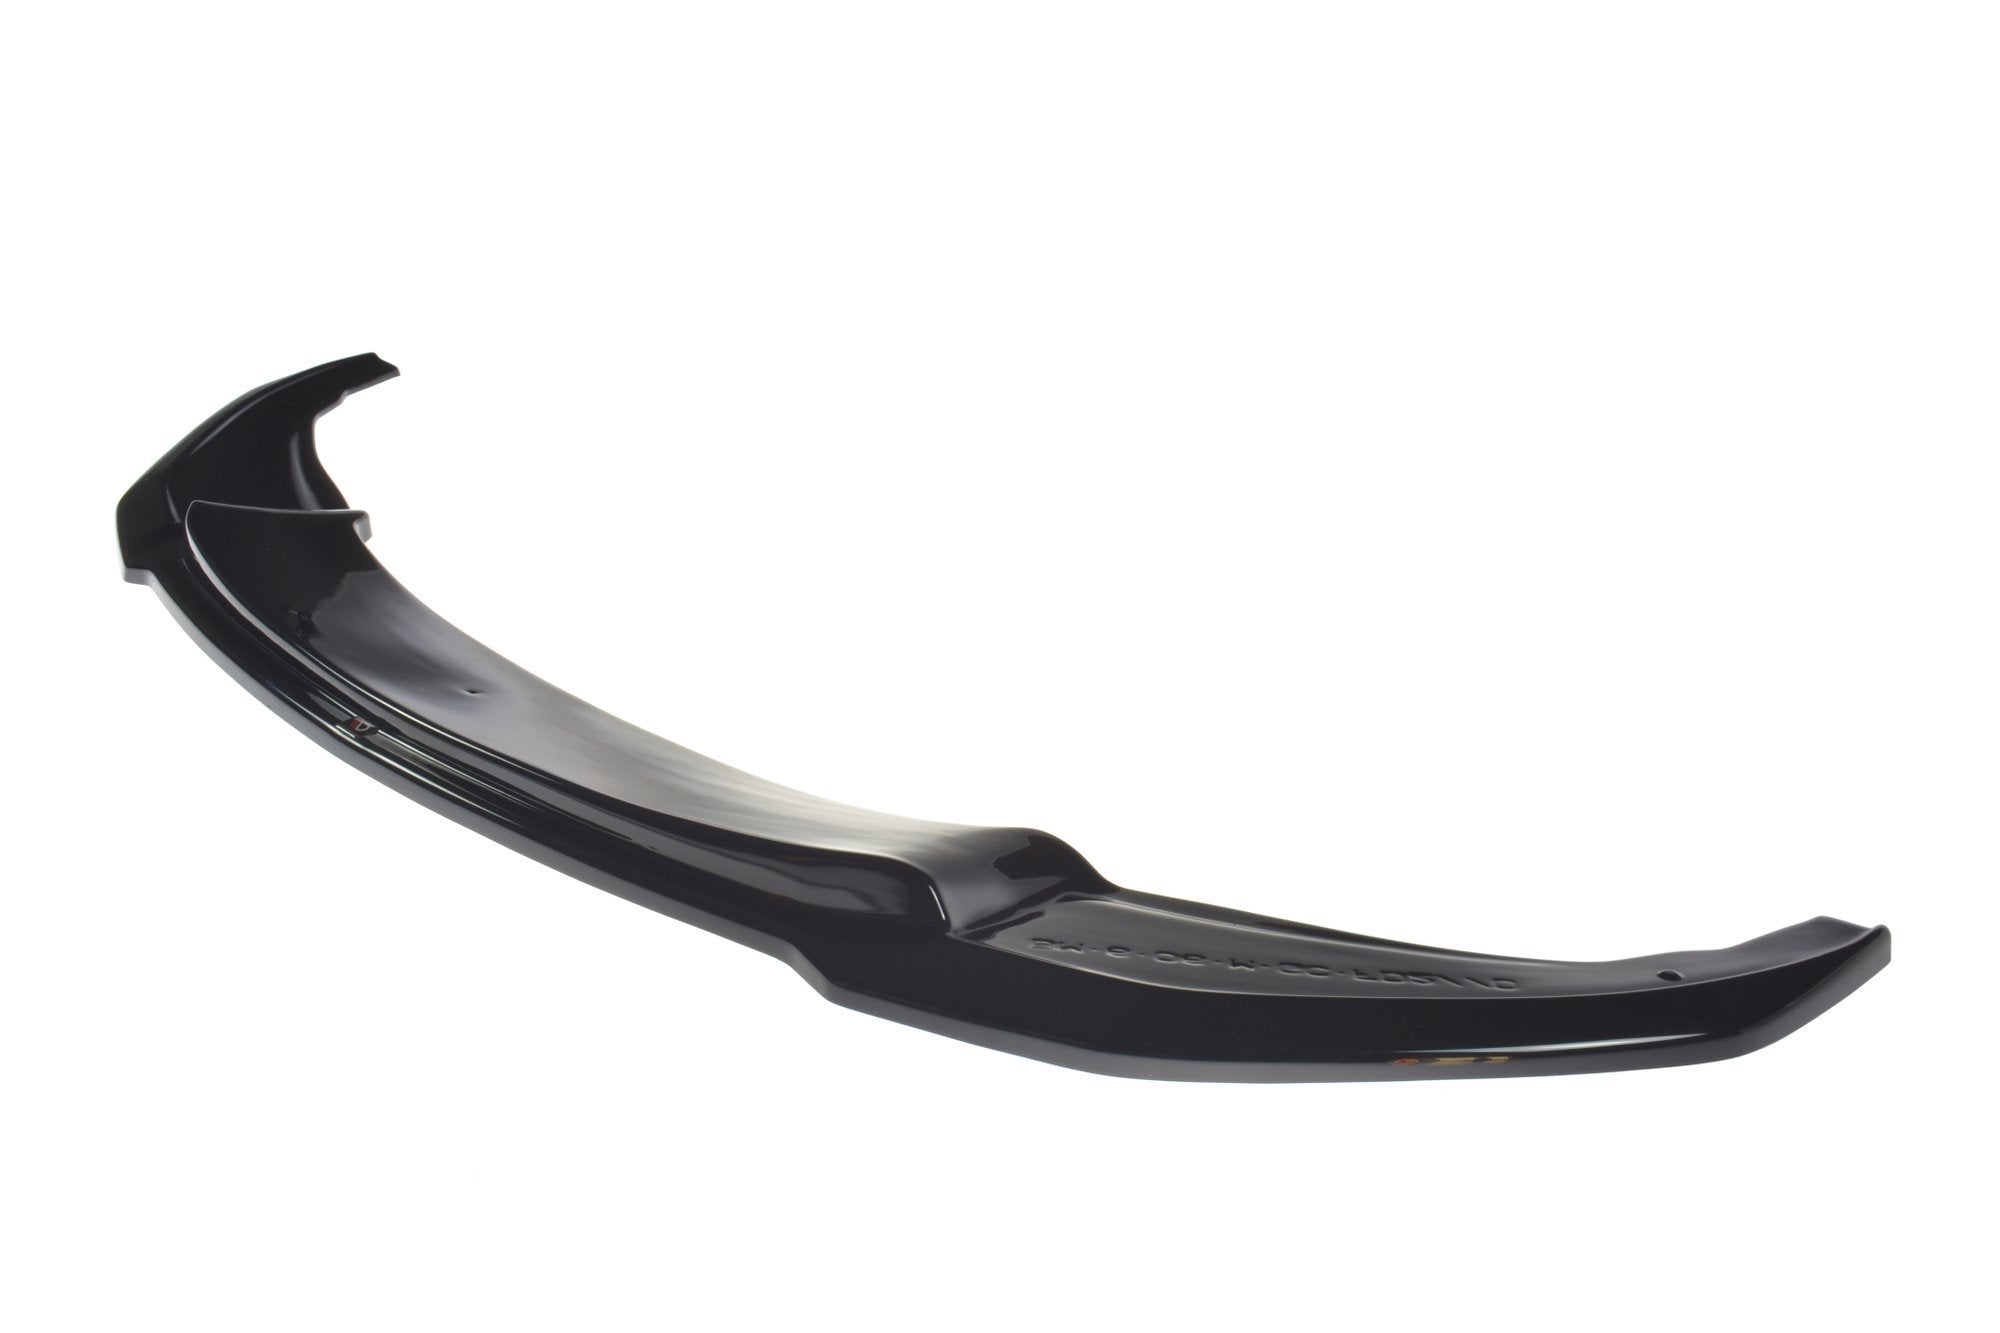 Front Splitter V.2 BMW M6 Gran Coupe / Coupe / Cabriolet F06 / F13 / F12